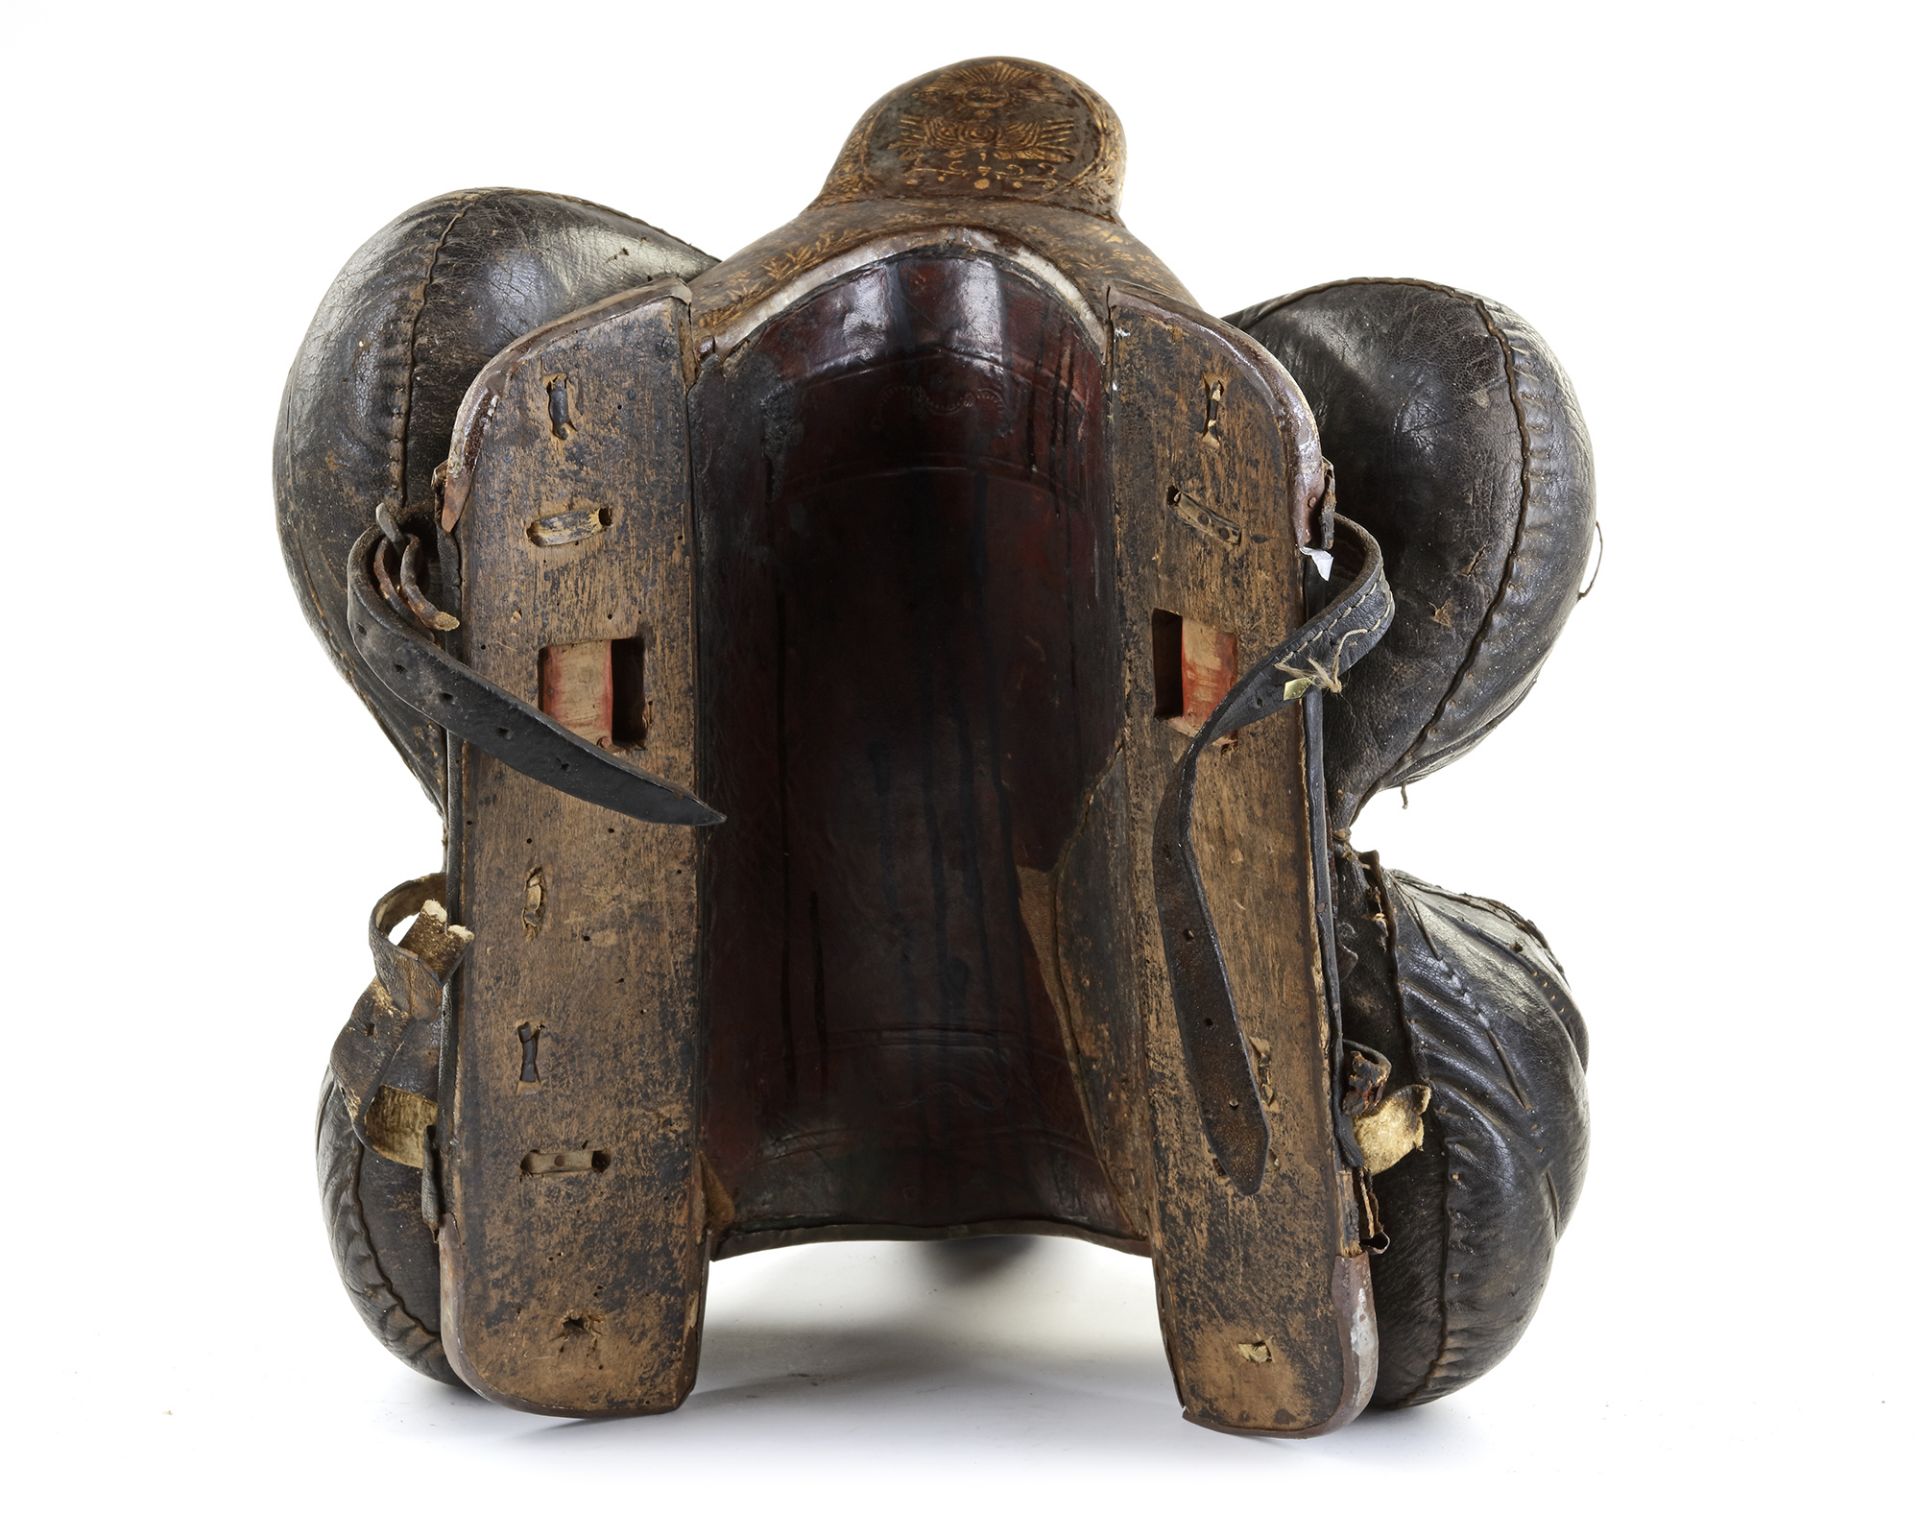 AN OTTOMAN LACQUER WOODEN SADDLE AND LEATHER COVER, EARLY 19TH CENTURY - Image 4 of 4